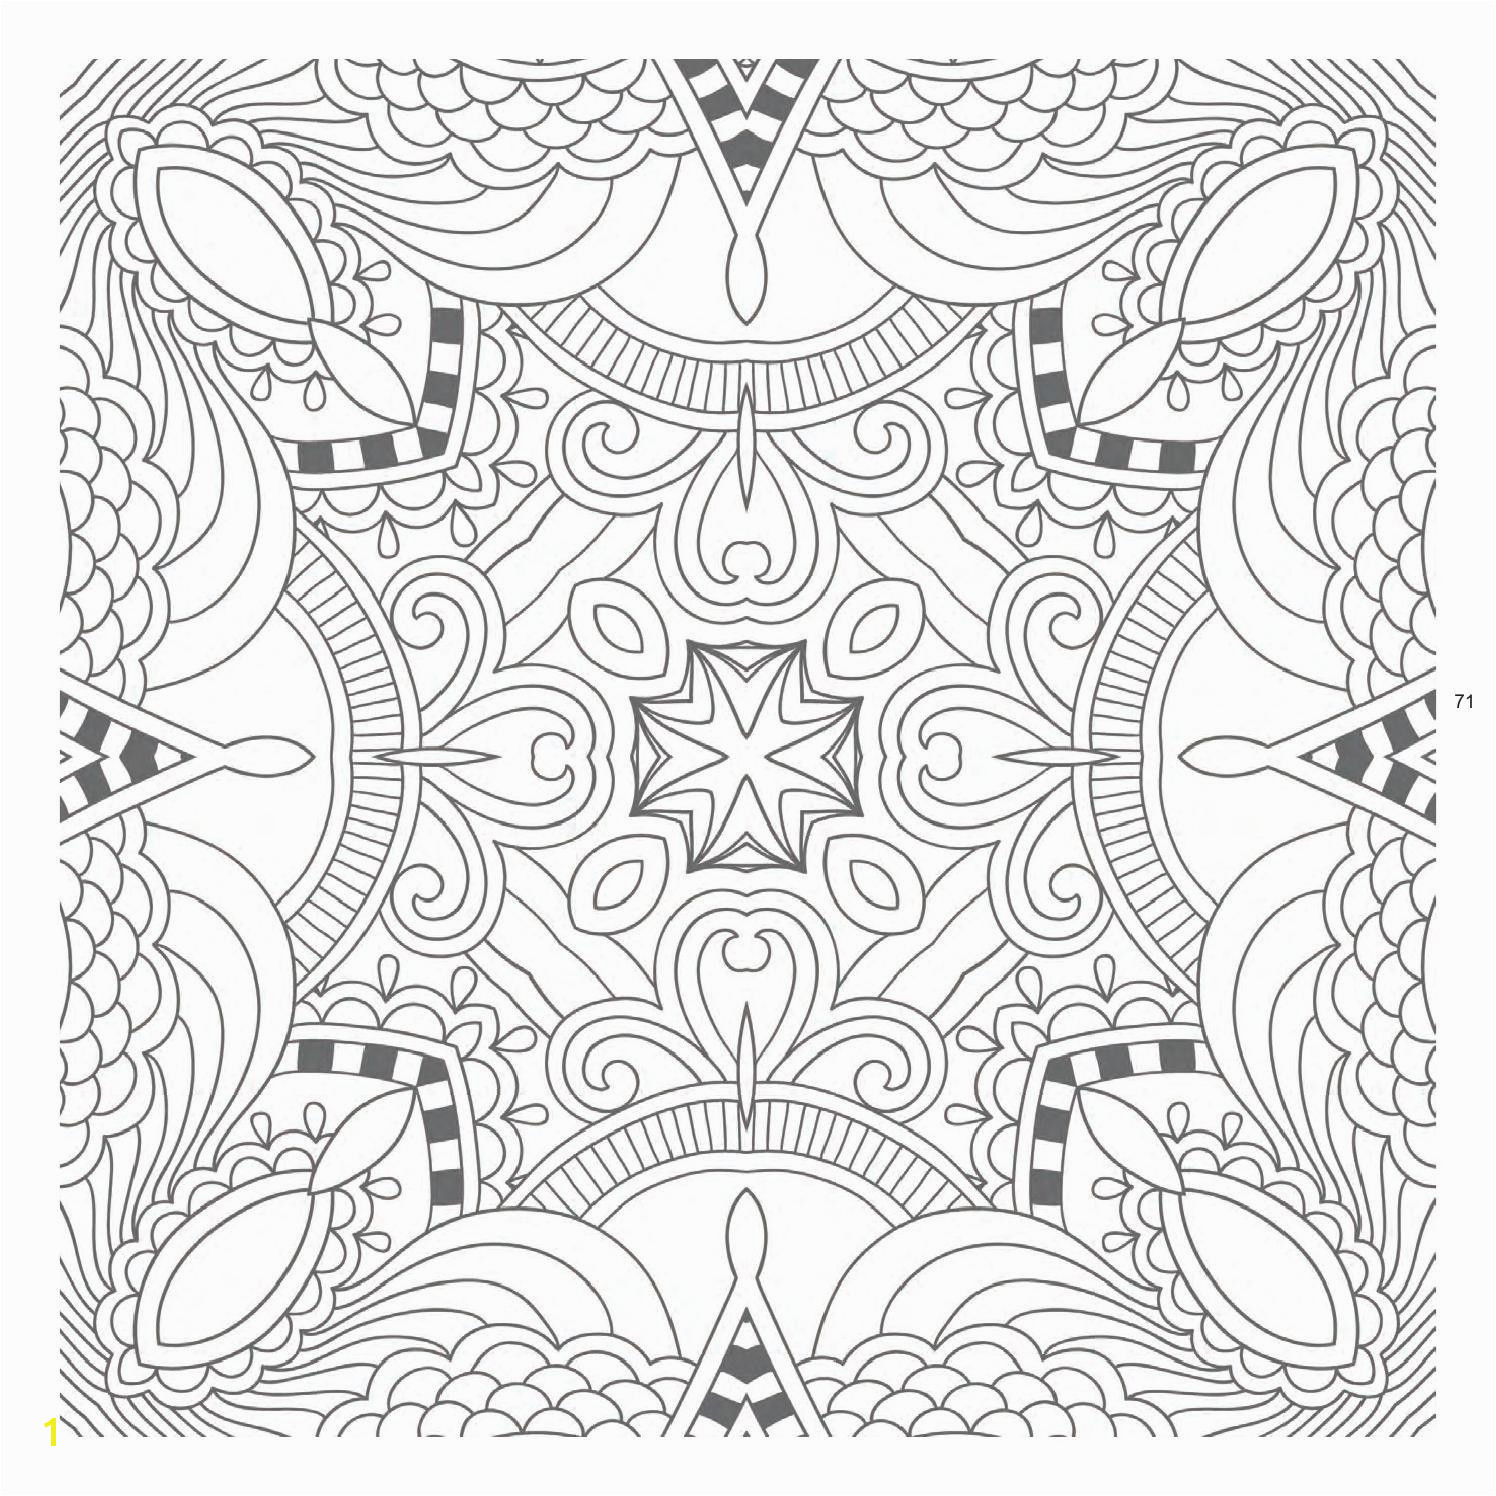 Printable plex Coloring Pages New Printable Plex Coloring Pages Cool Coloring Pages Printable plex Coloring